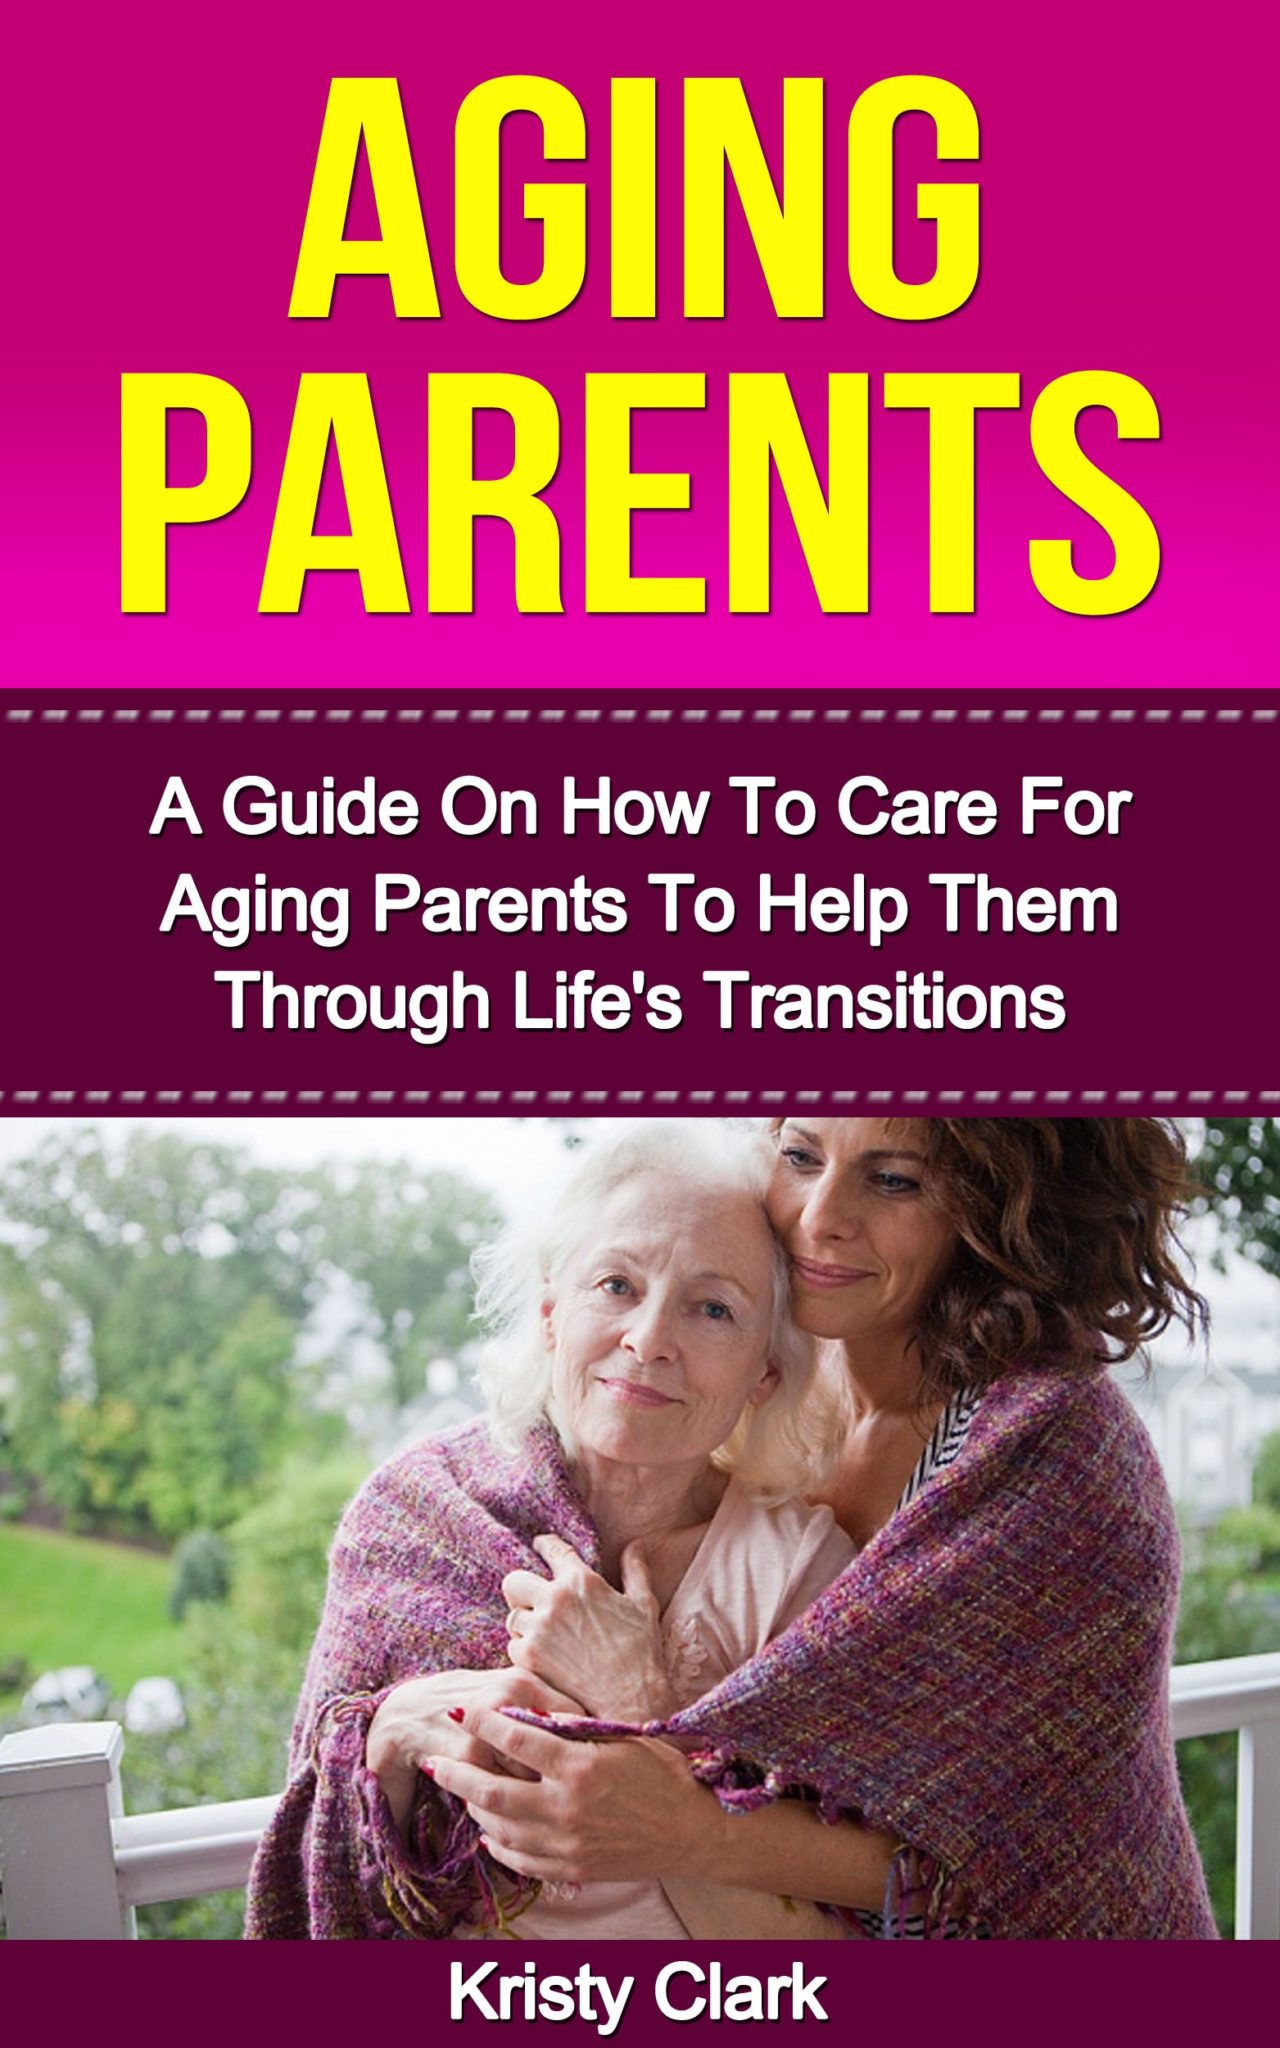 Aging Parents – A Guide On How To Care For Aging Parents To Help Them Through Life’s Transitions. by Kristy Clark